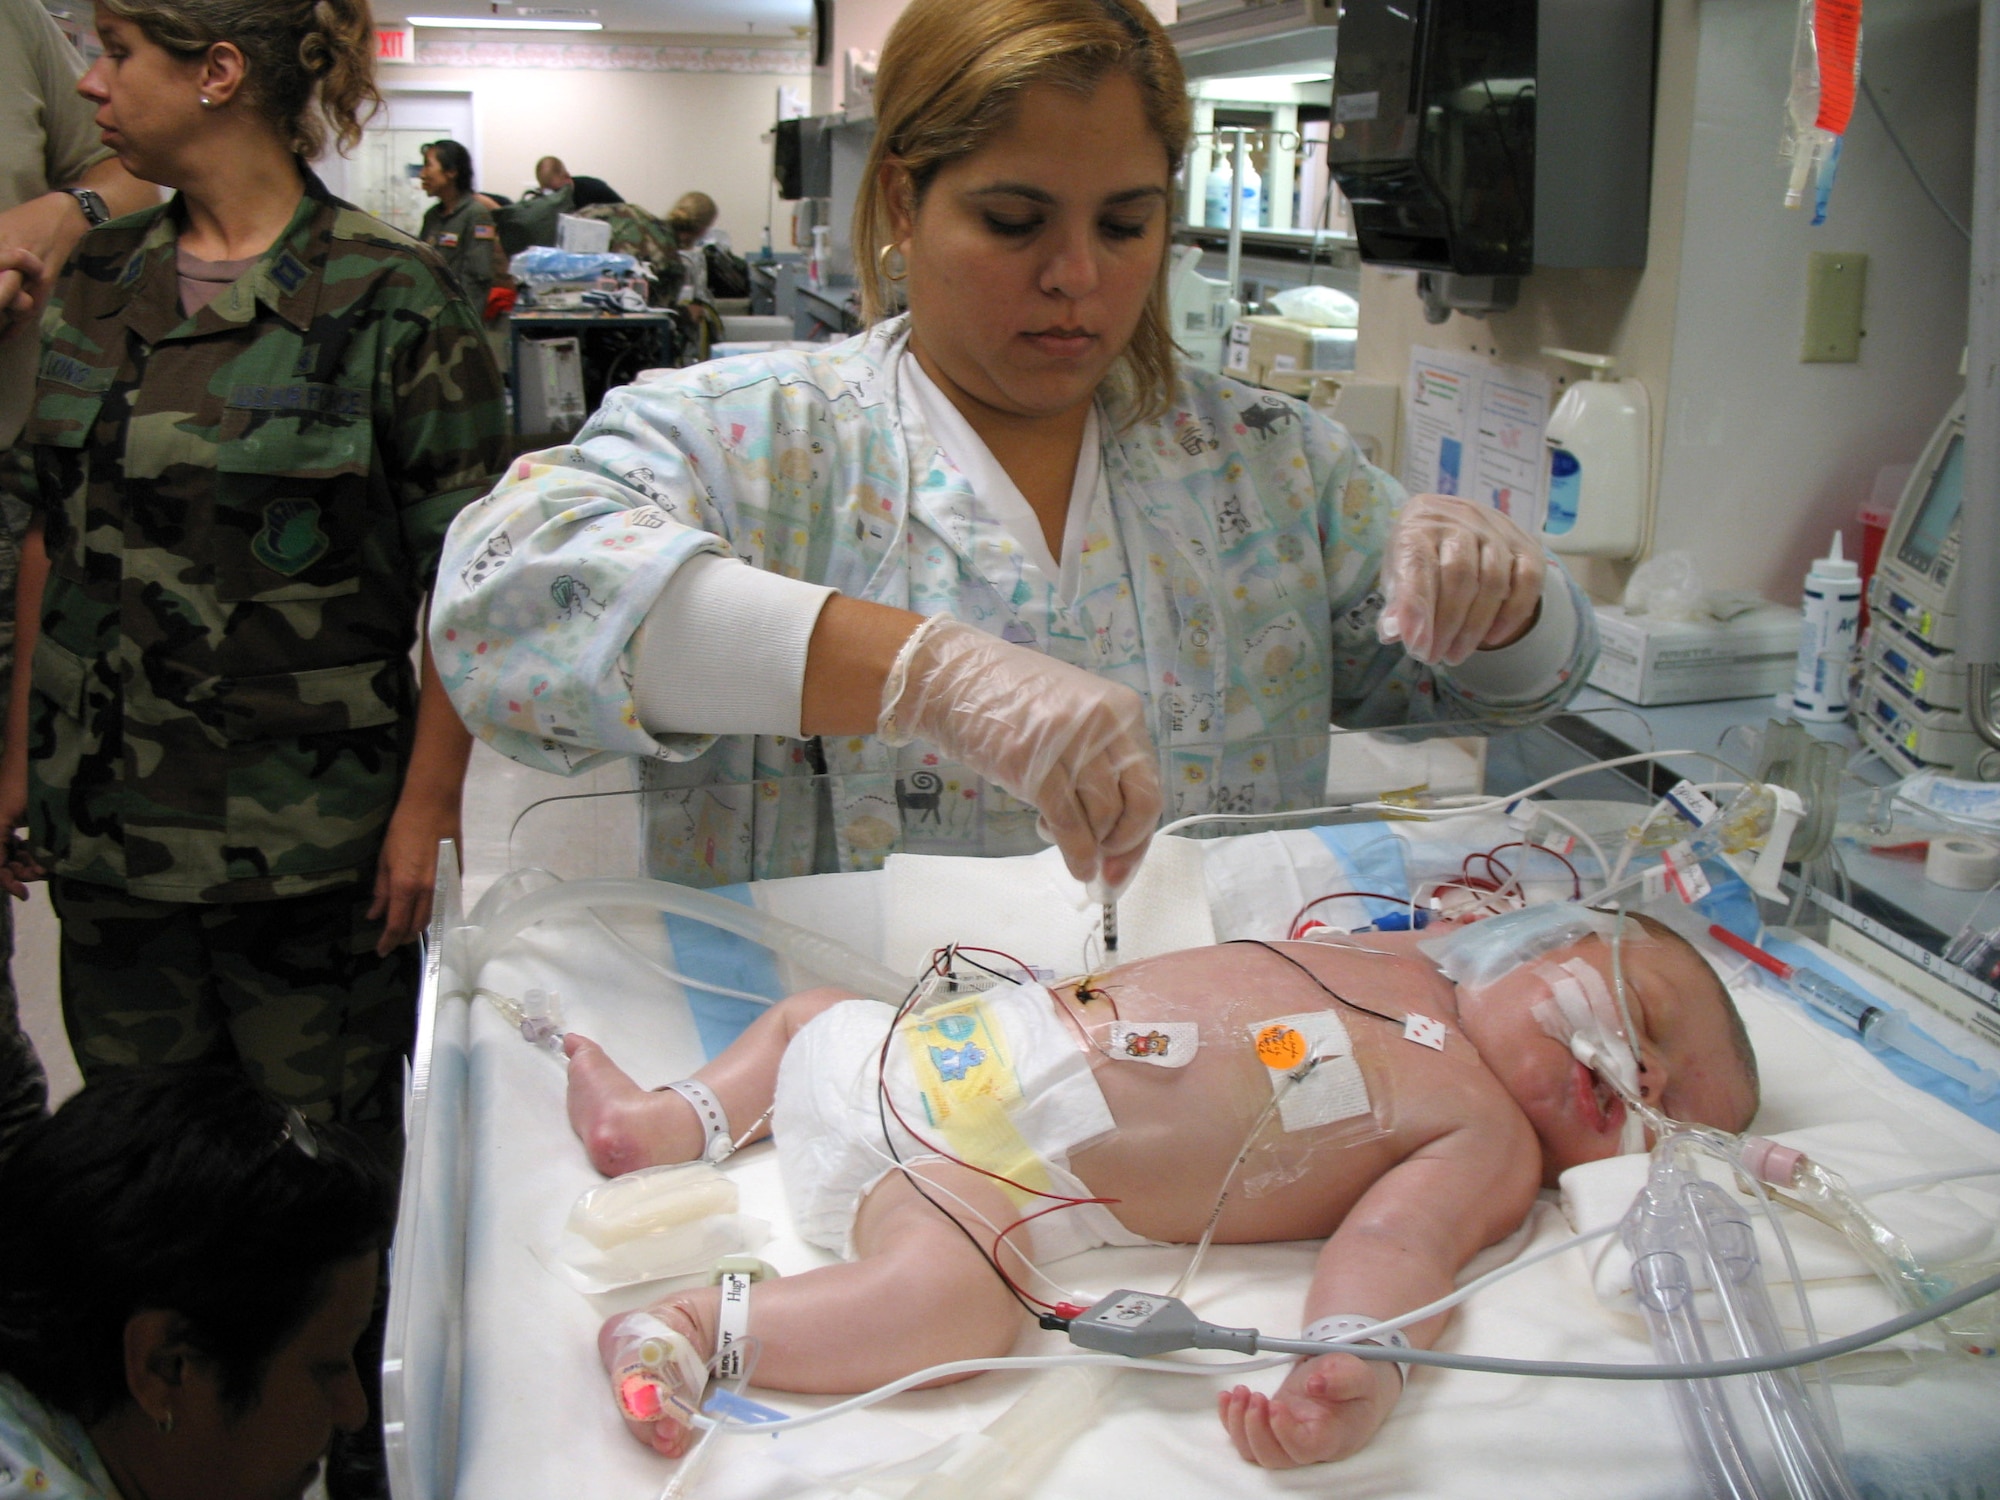 Michelle Sirra takes a blood sample from 3-day-old Stuart Parker in preparation for transfer to an Extracorporeal Membrane Oxygenation unit on Friday, July 21, in San Juan, Puerto Rico. An ECMO team comprised Air Force and Army medical specialists from the Wilford Hall Medical Center at Lackland Air Force Base, Texas, flew to Puerto Rico to transport Stuart to San Antonio for more advanced care. Ms. Sirra is a respiratory therapist in the neonatal intensive care unit at the Hospital Auxilio Mutuo in San Juan. (U.S. Air Force photo/Staff Sgt. Matthew Rosine) 